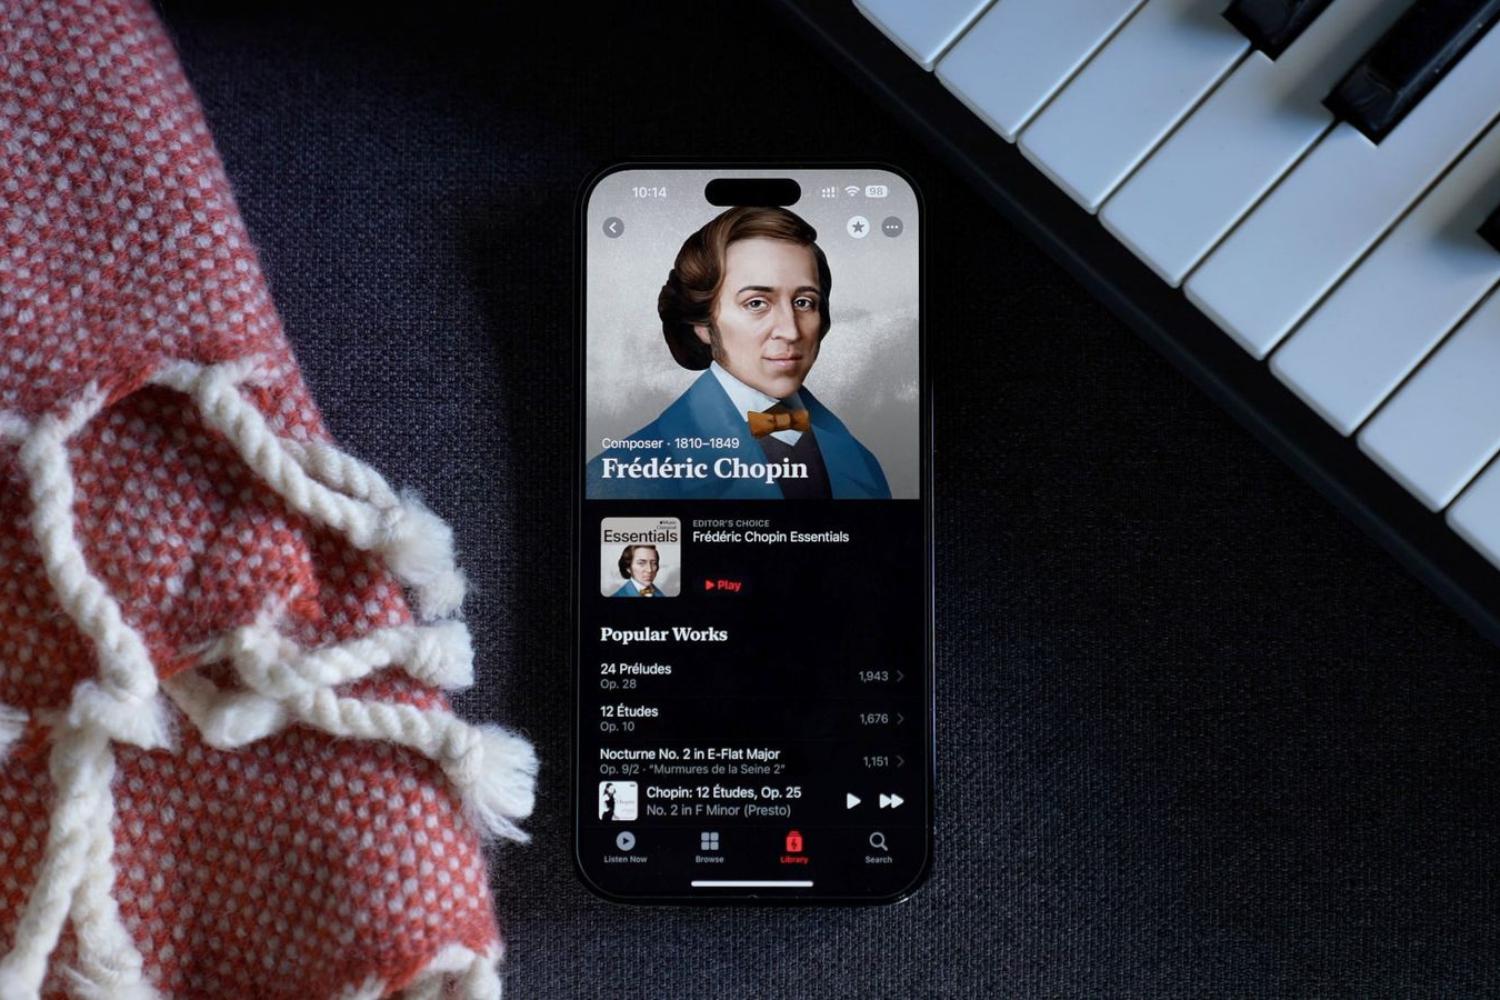 apple music classical on iphone 65b20873381b5915be4ef061